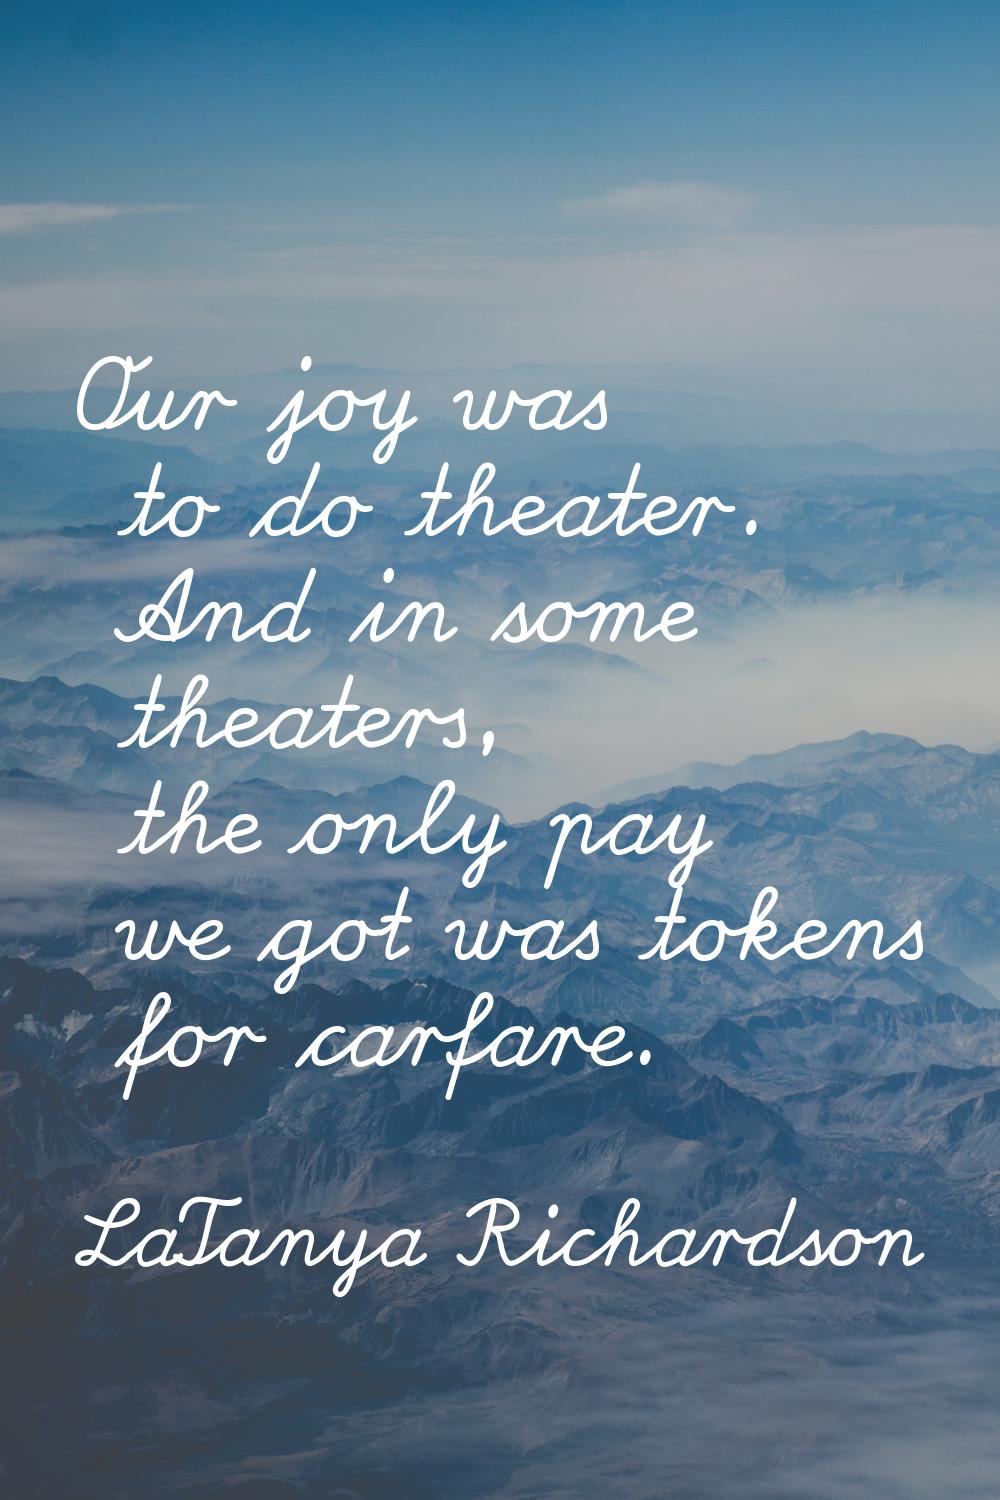 Our joy was to do theater. And in some theaters, the only pay we got was tokens for carfare.